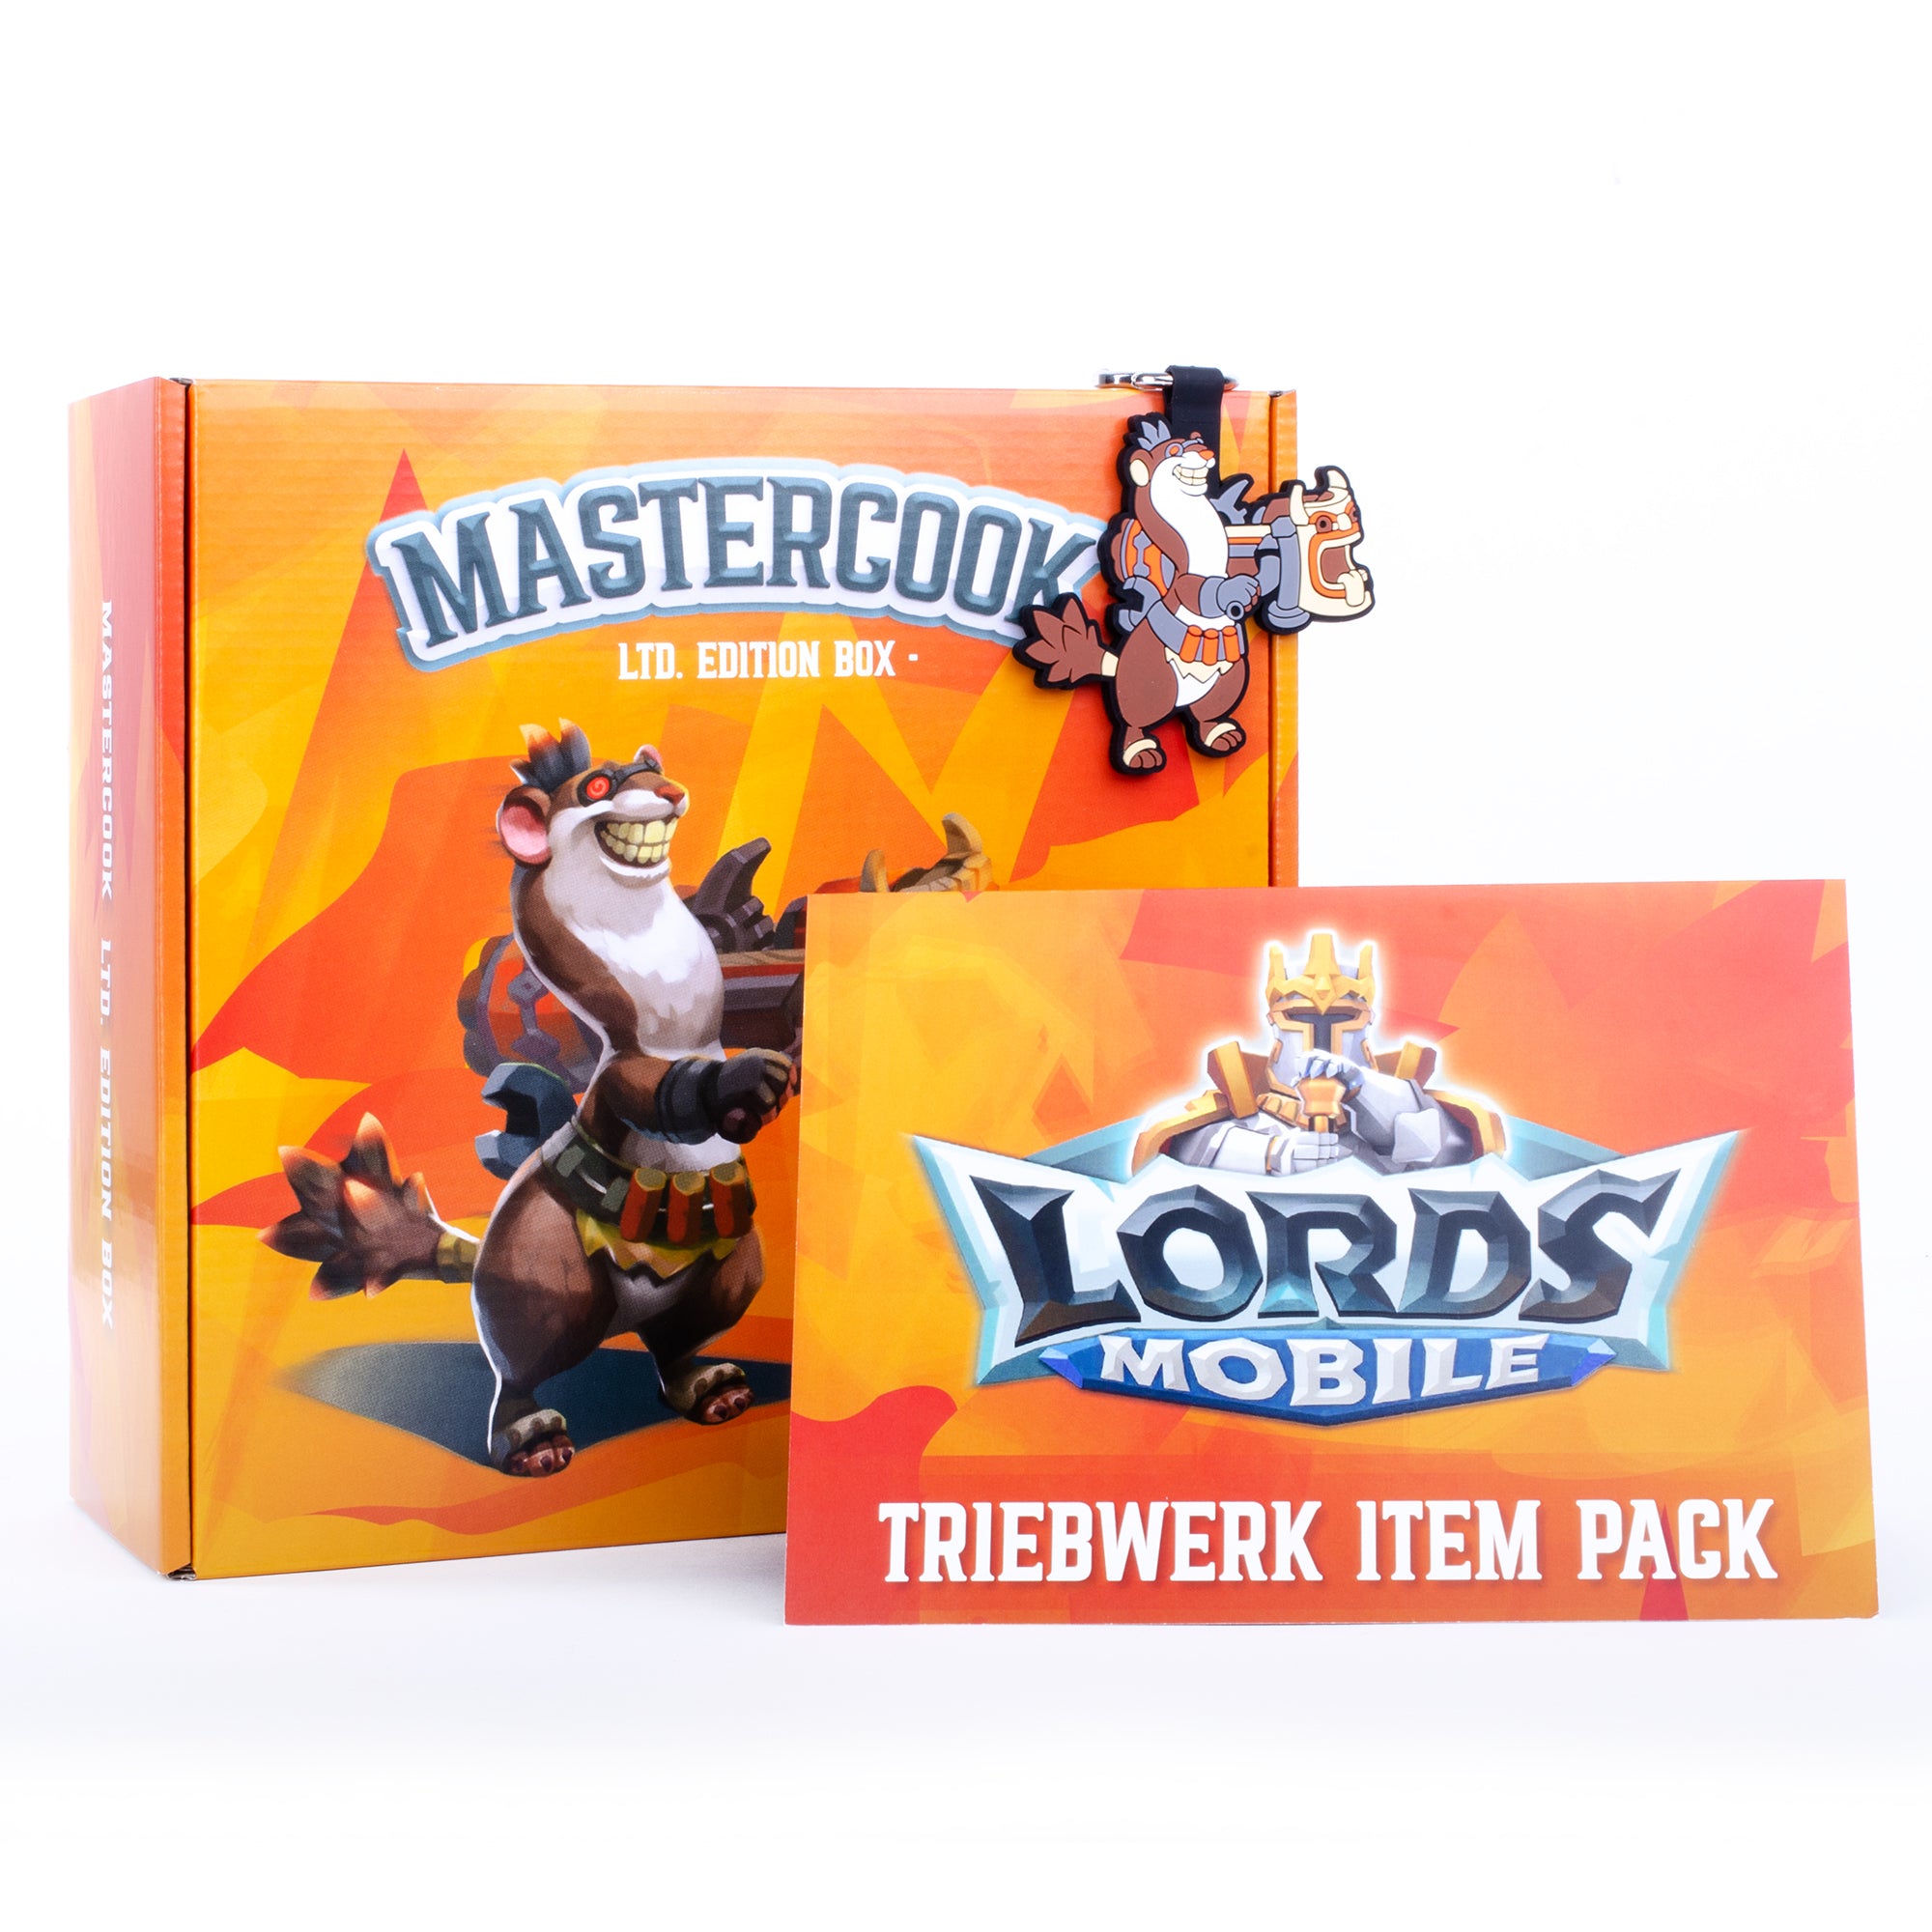 Lords Mobile Box - Mastercook